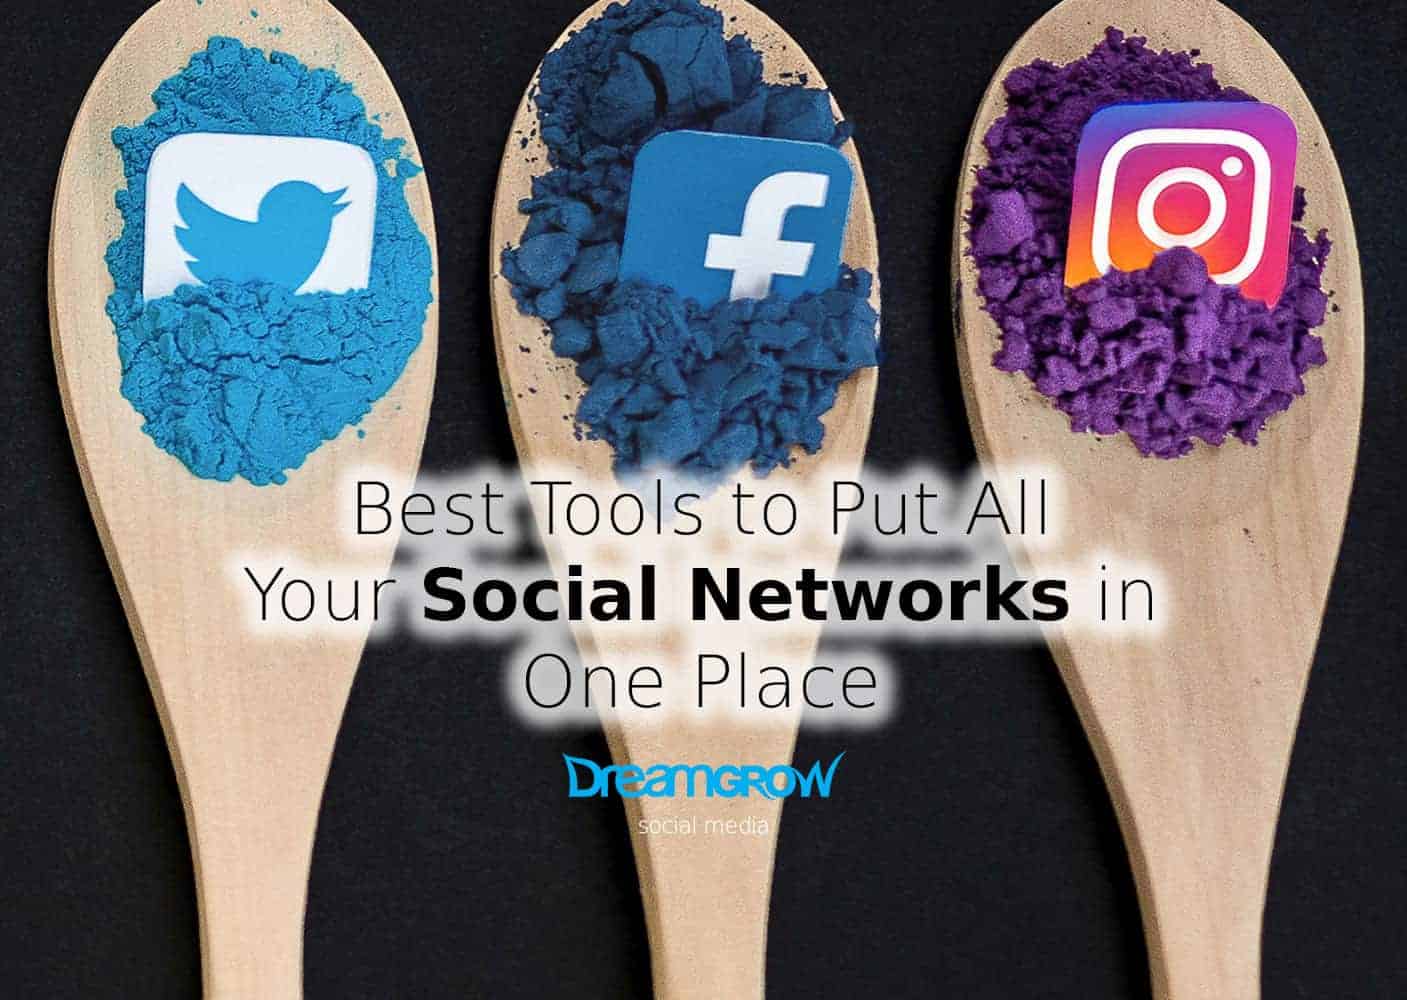 best tools to put social networks in one place